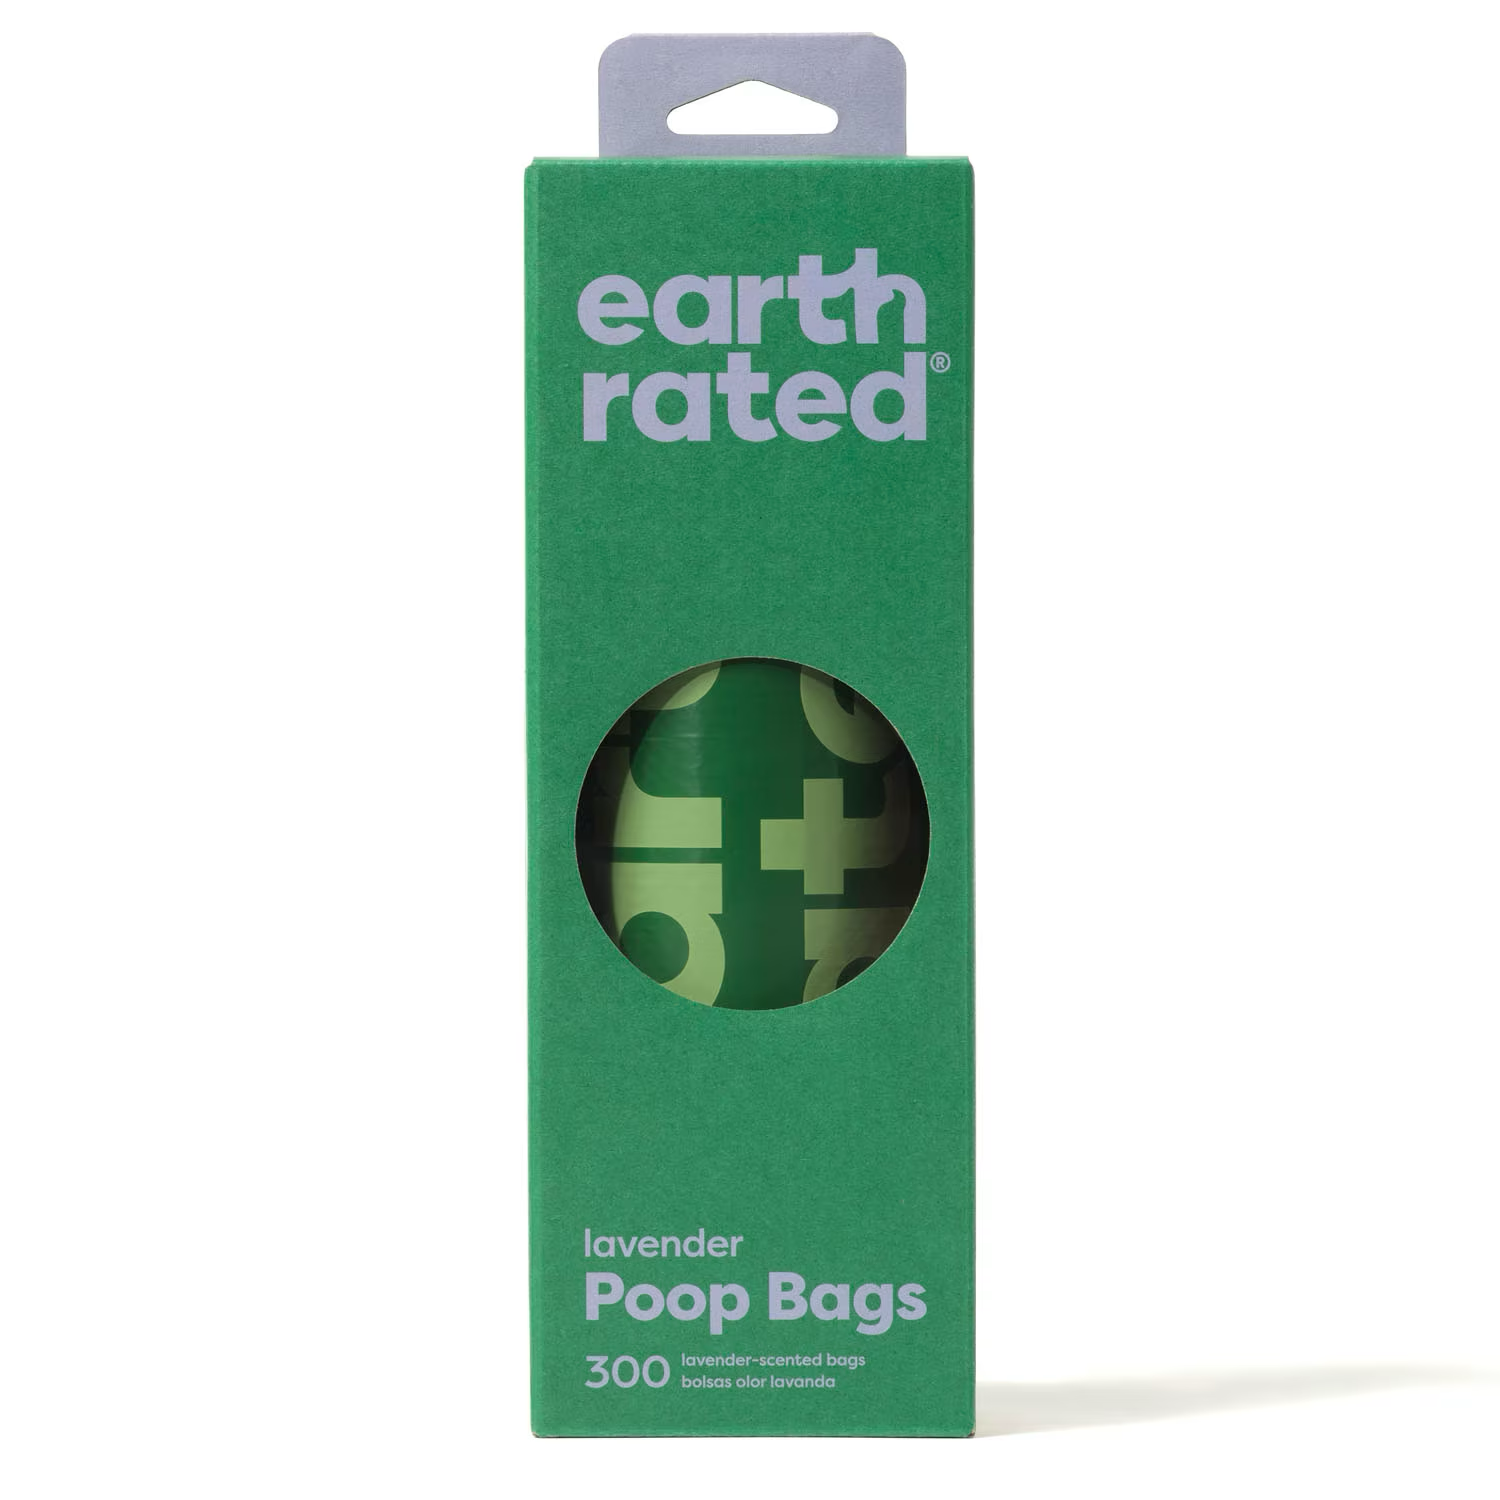 Earth Rated 300 Lavender-Scented Dog Waste Bags on a Single Roll 300 Bags Waste Management 300 Bags | PetMax Canada